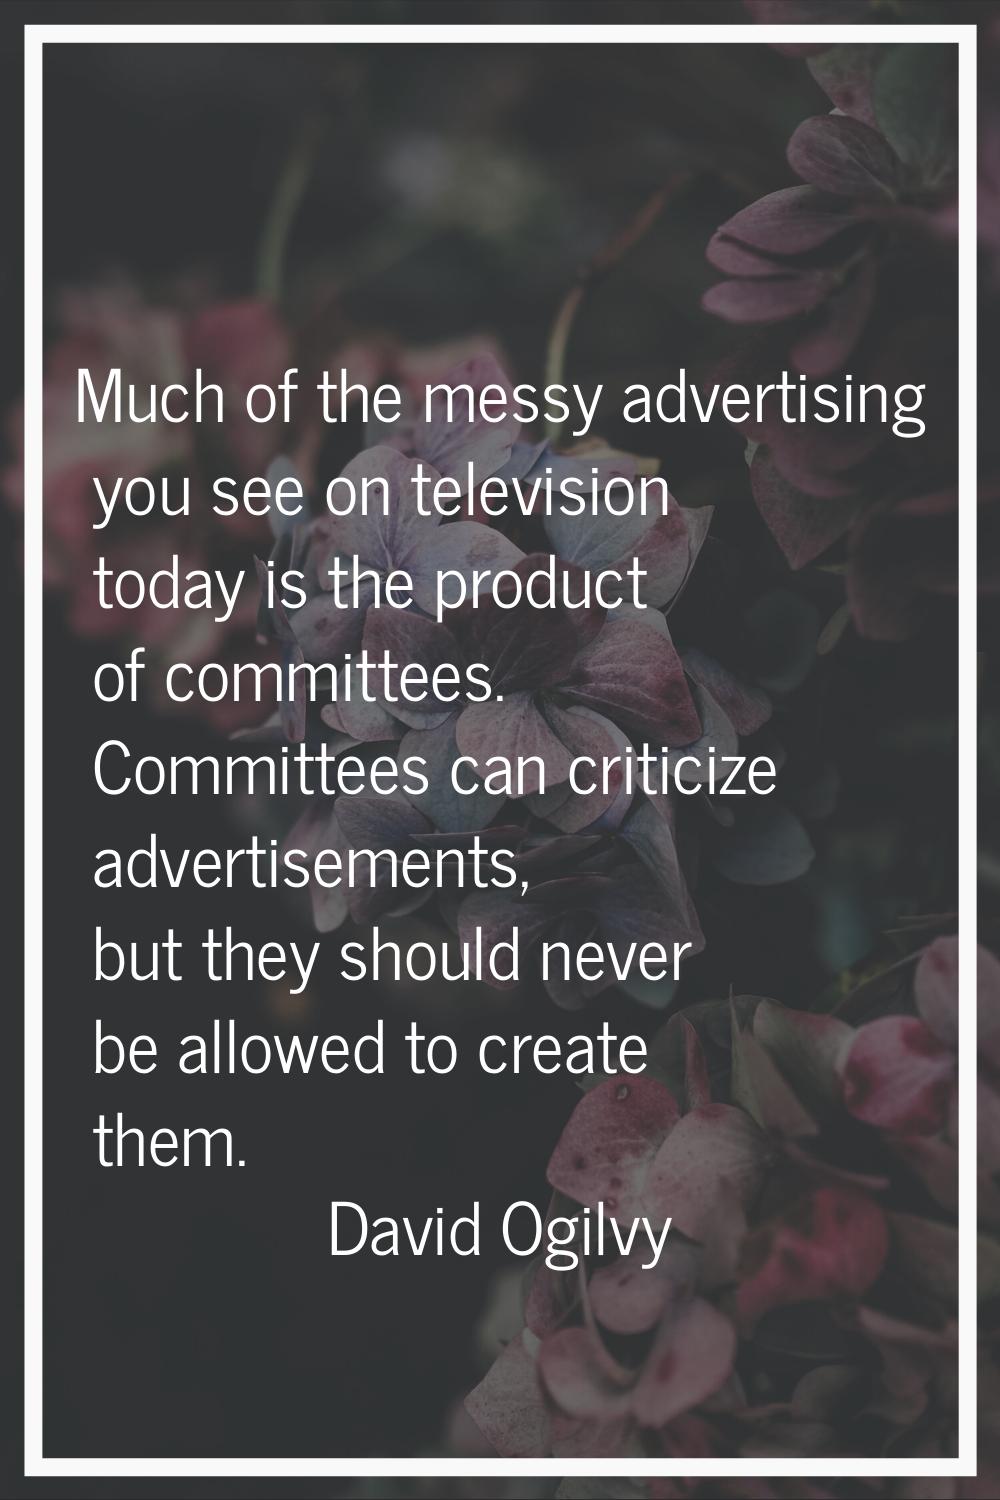 Much of the messy advertising you see on television today is the product of committees. Committees 